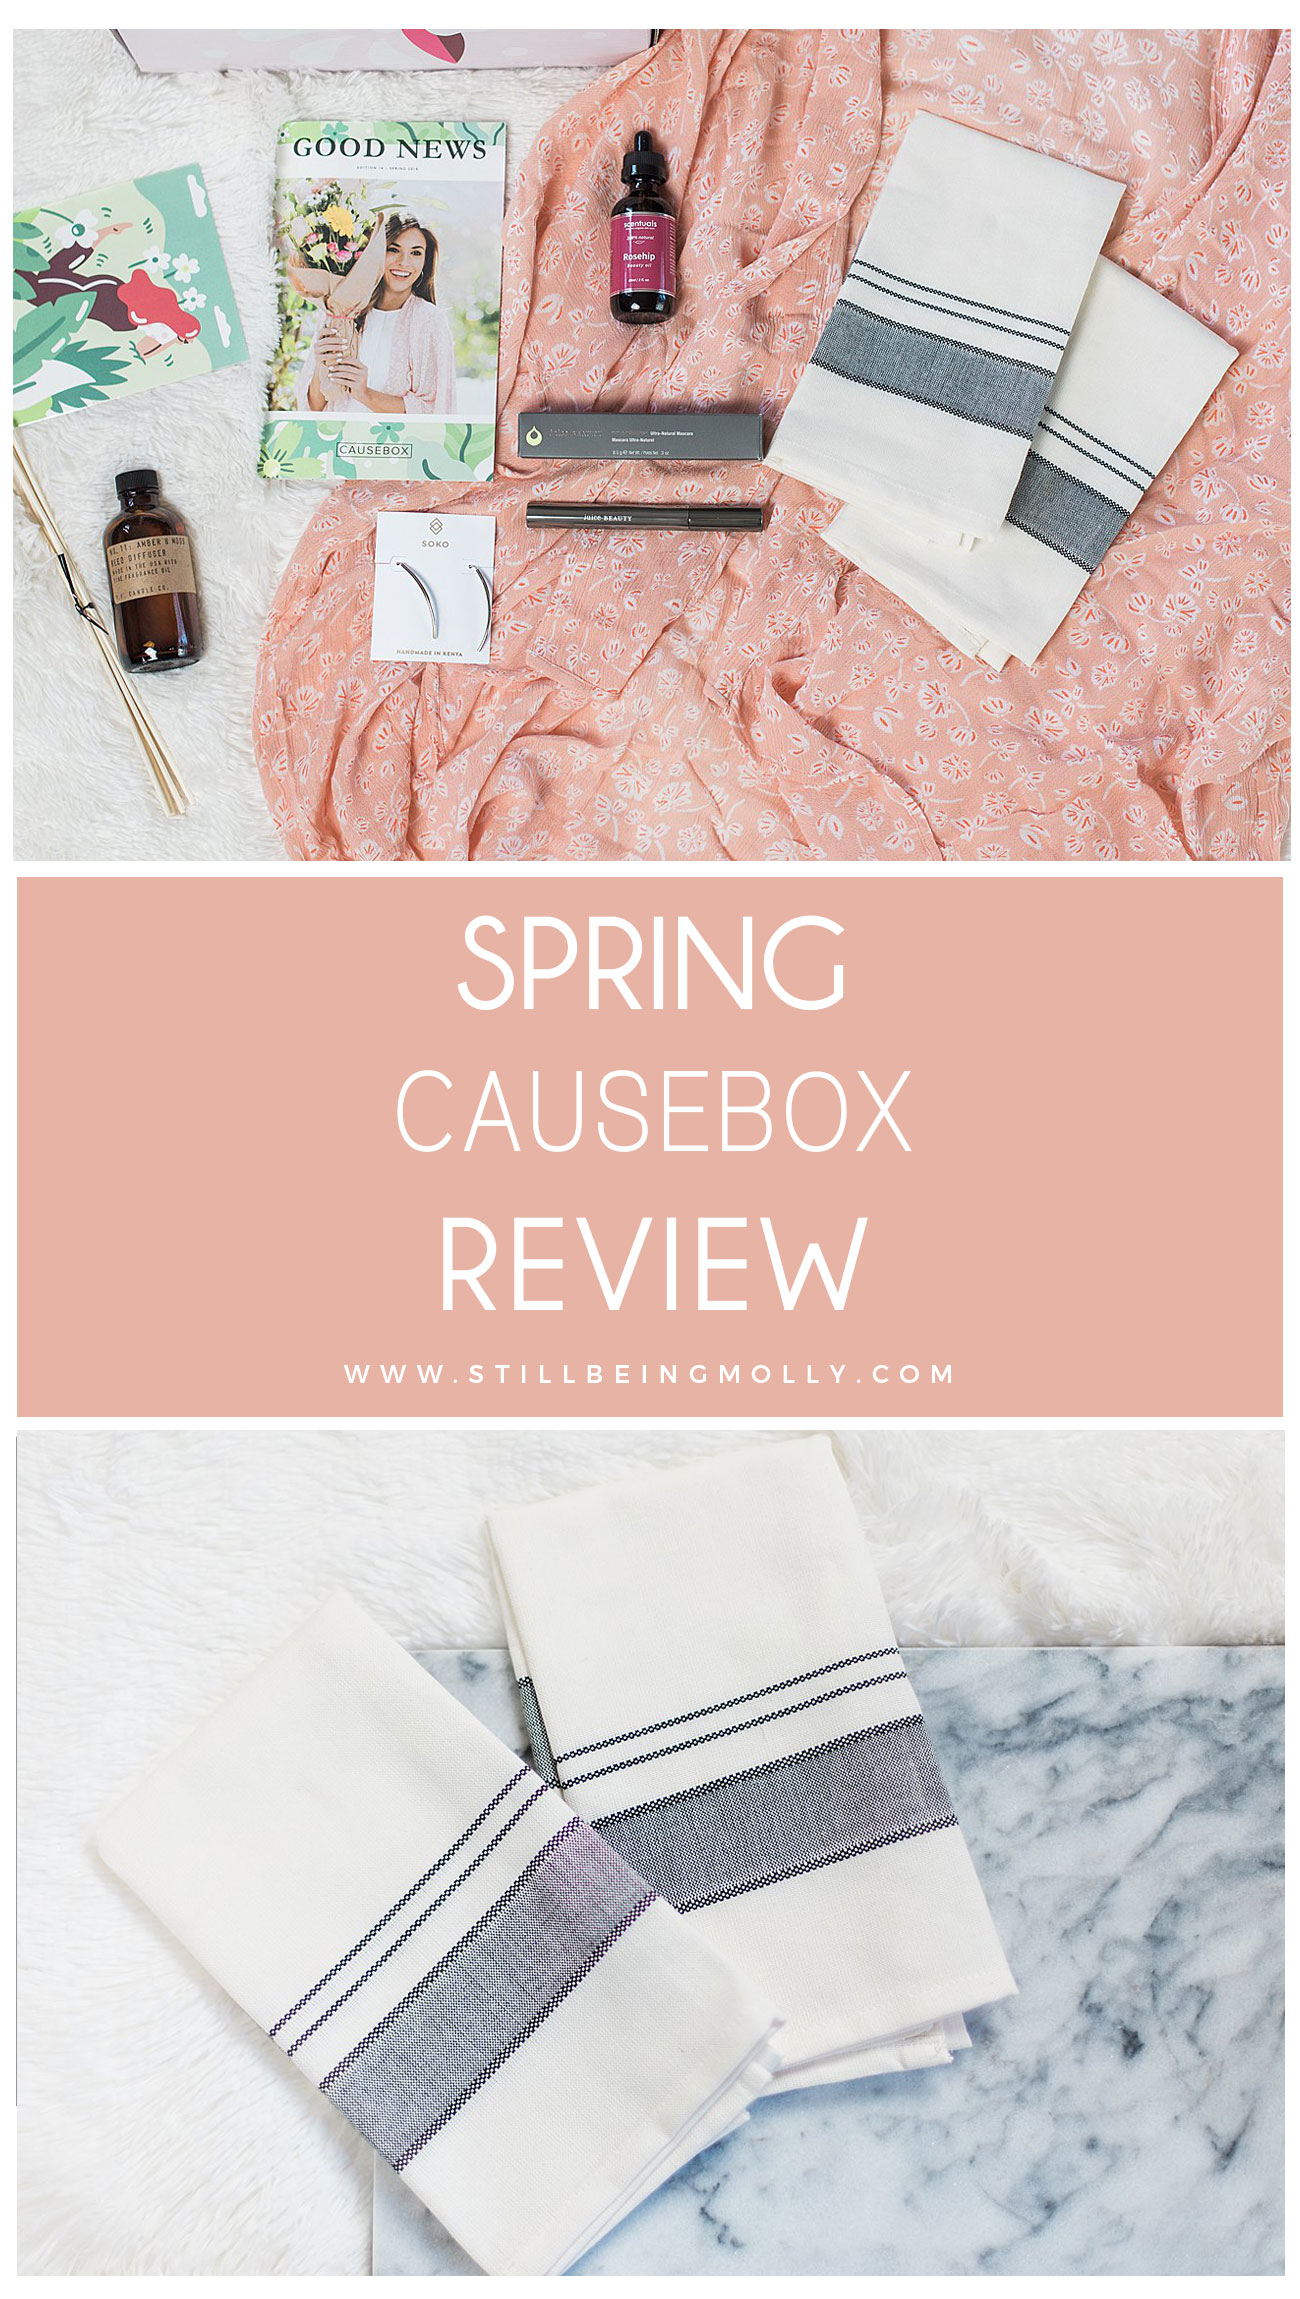 Spring CAUSEBOX Ethical Subscription Box Review (13) - Spring CAUSEBOX Review by popular North Carolina ethical blogger Still Being Molly